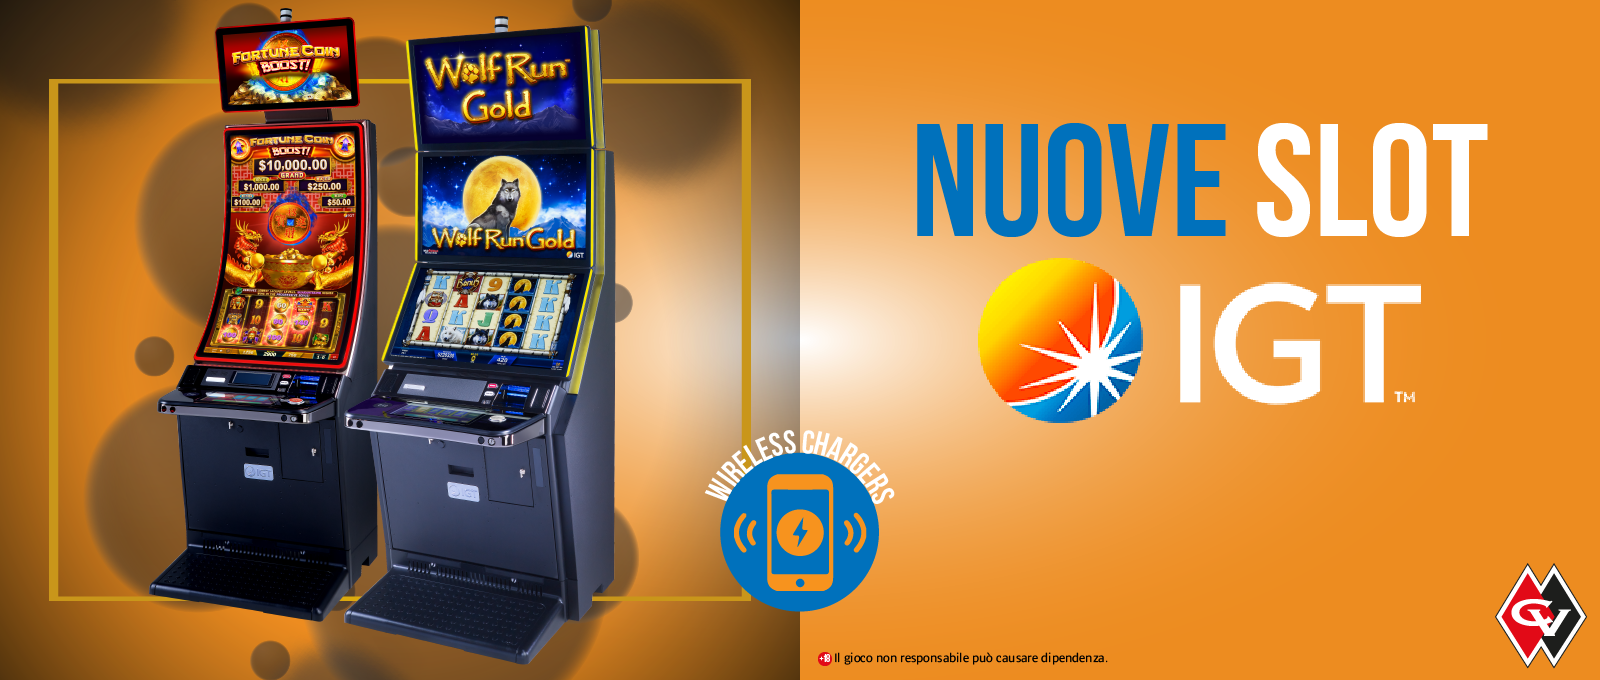 NUOVE SLOT IGT